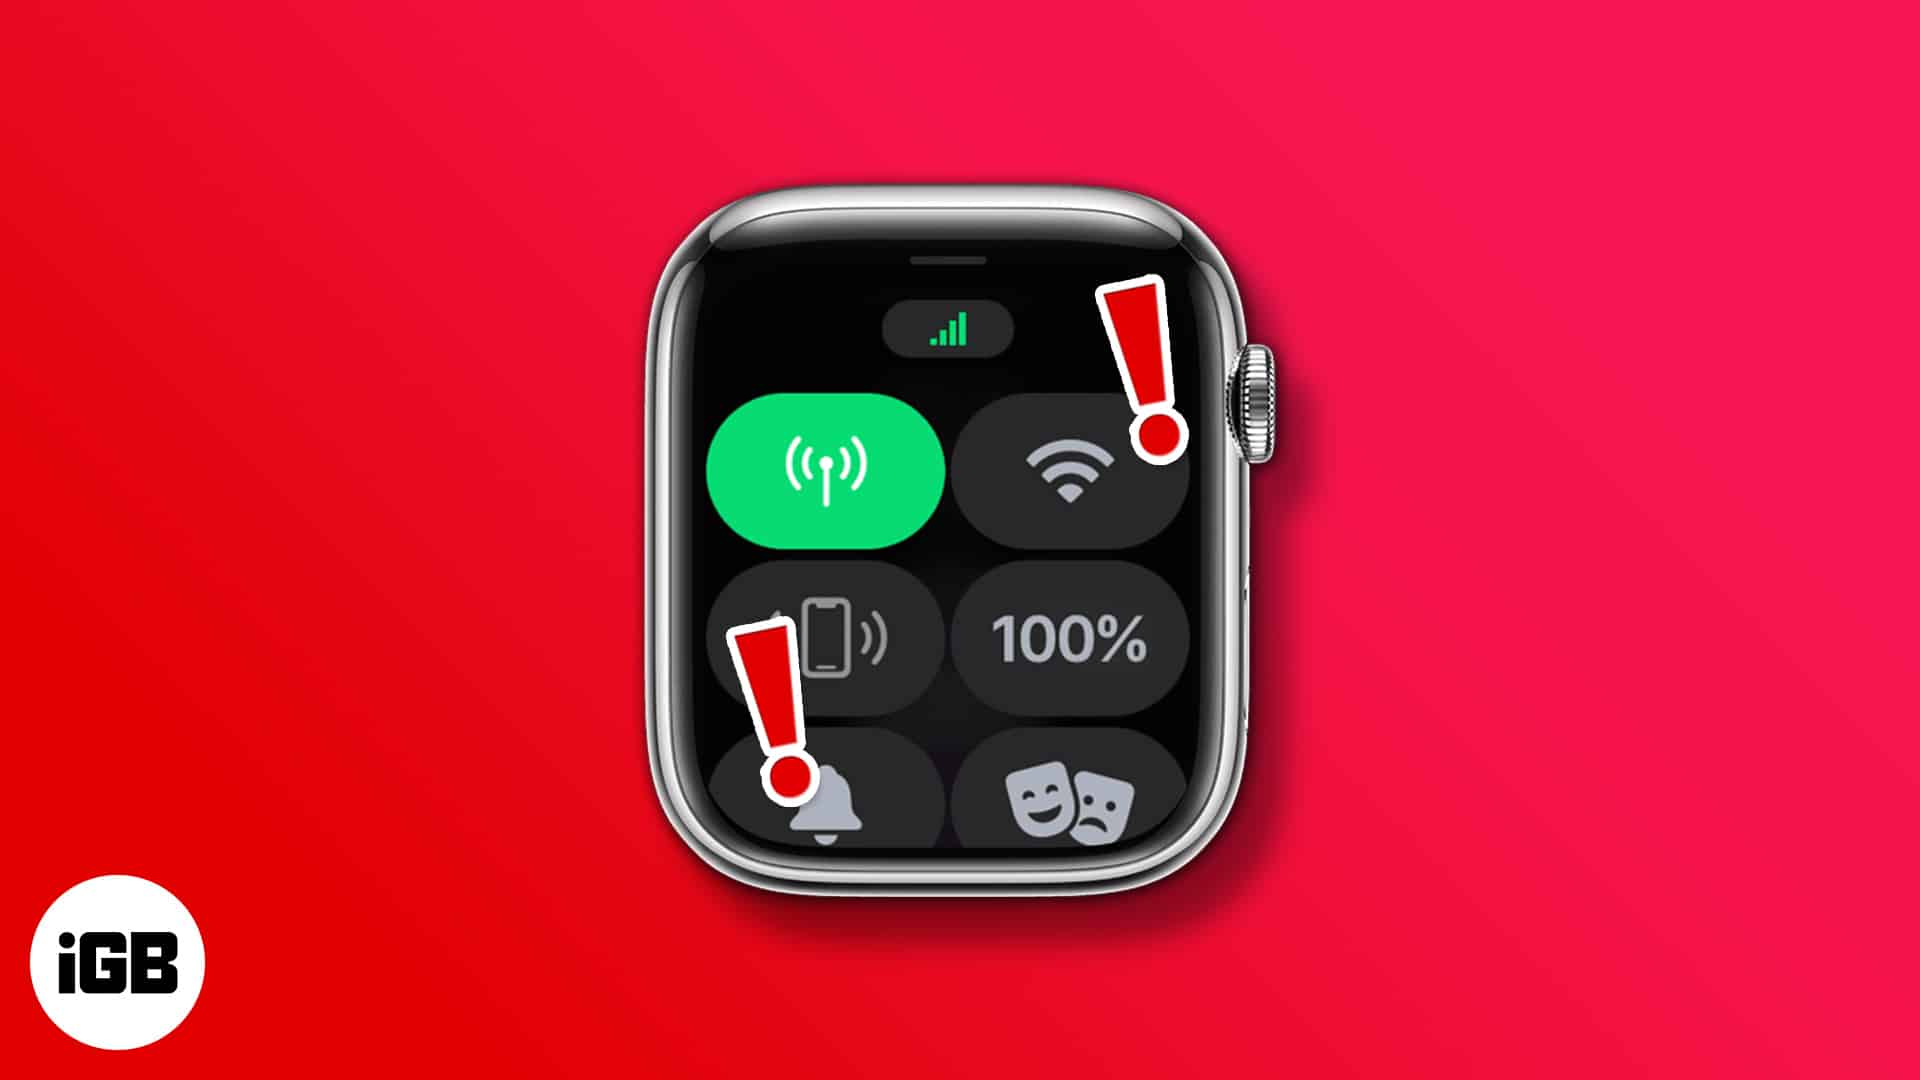 What happens if I don't activate cellular on Apple Watch?